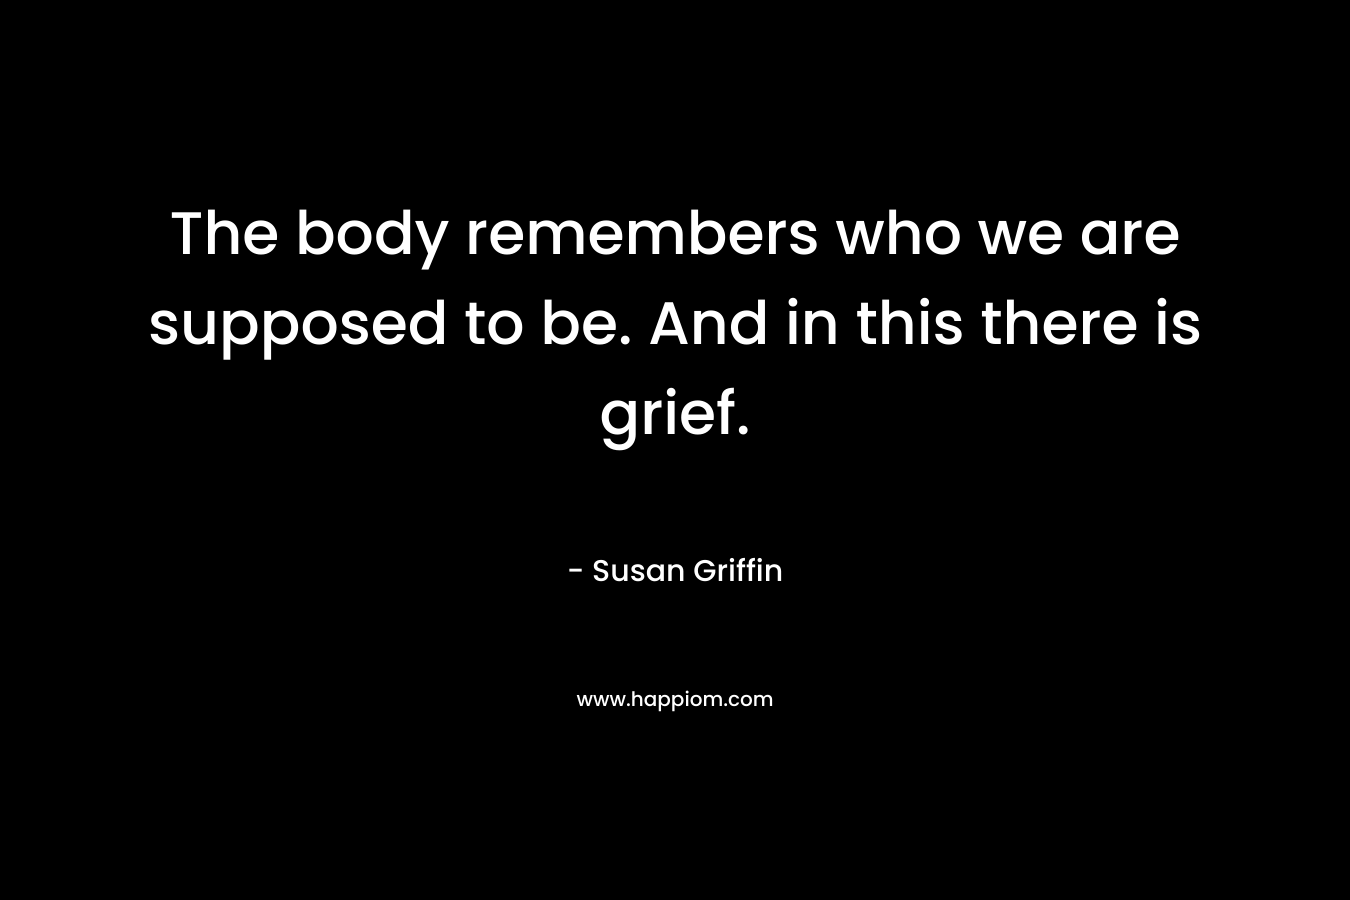 The body remembers who we are supposed to be. And in this there is grief. – Susan Griffin